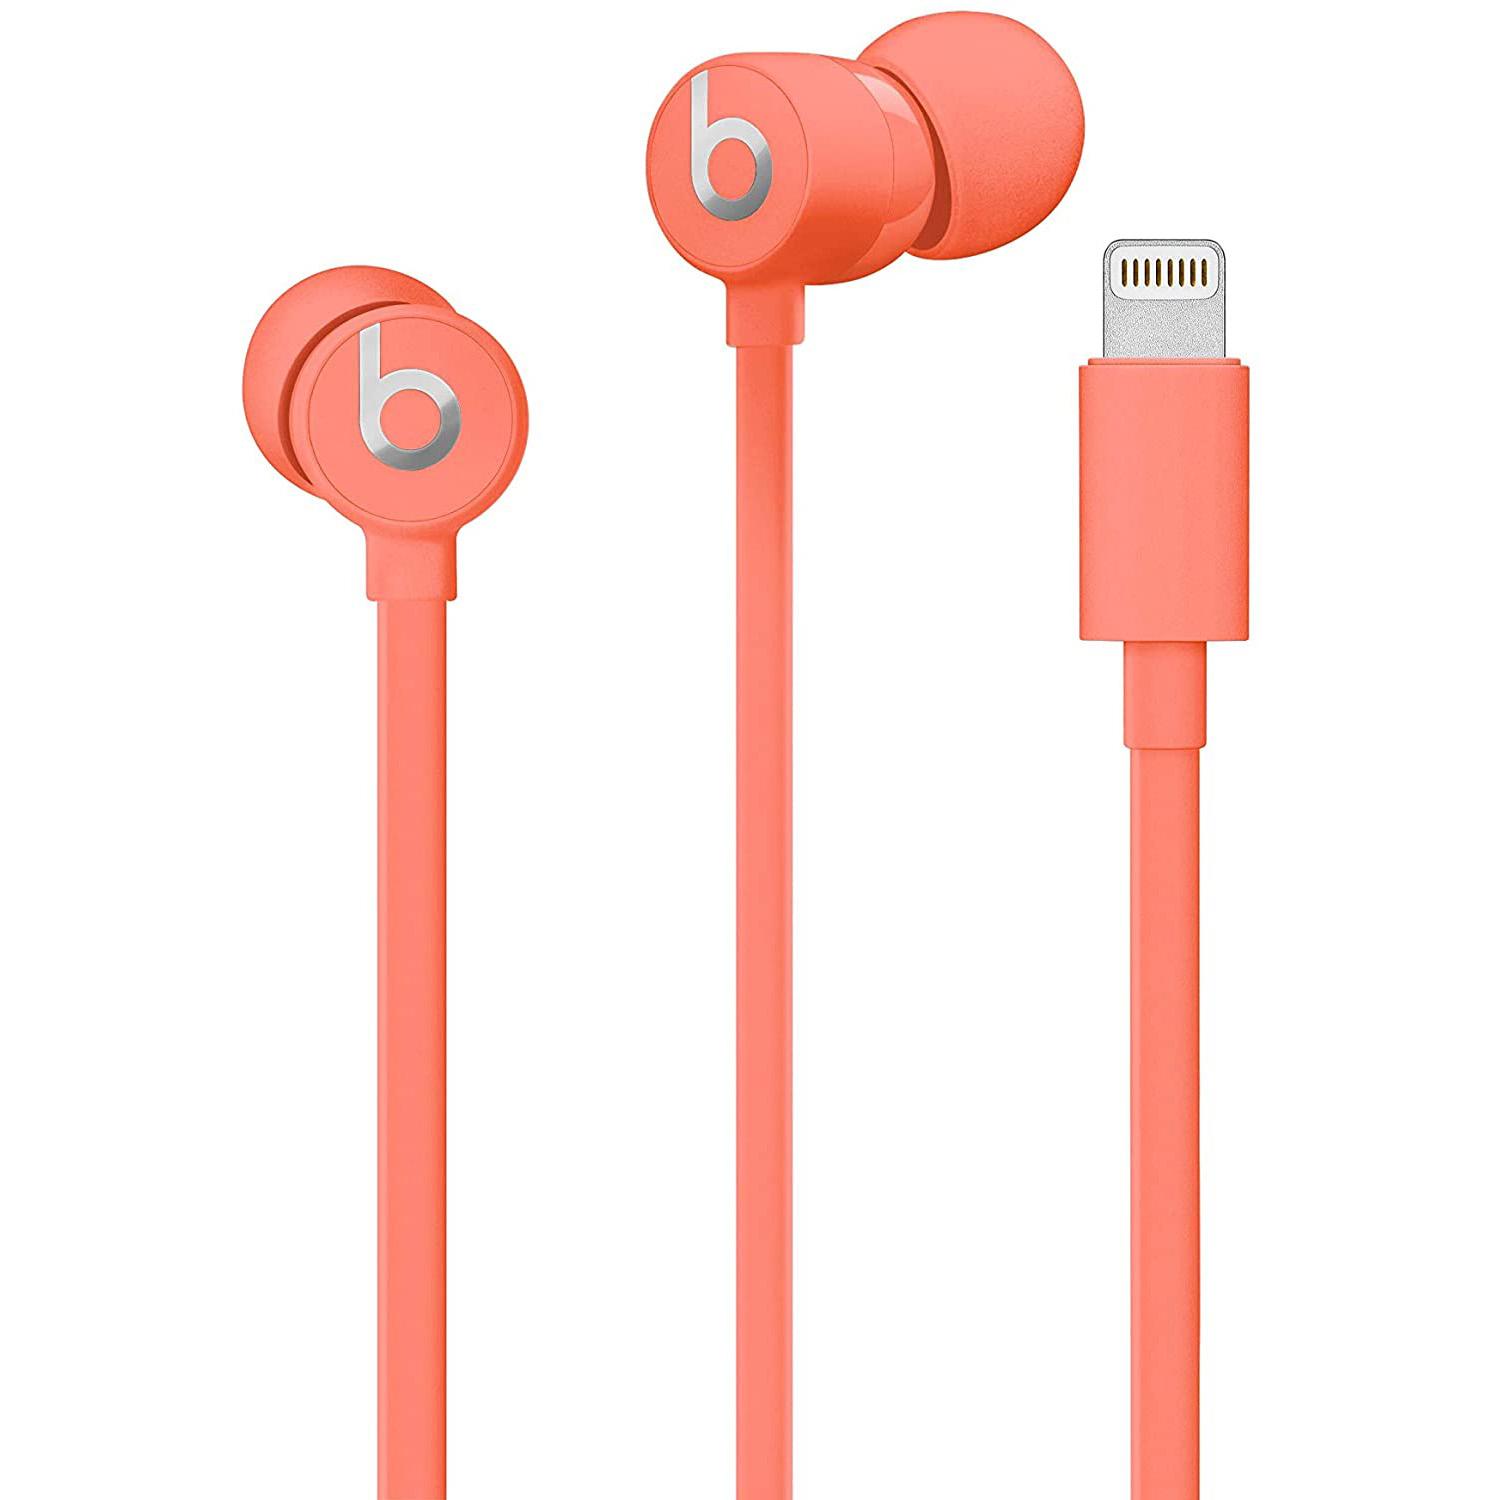 Urbeats3 Wired Earphones With Lightning Connector for $29.99 Shipped